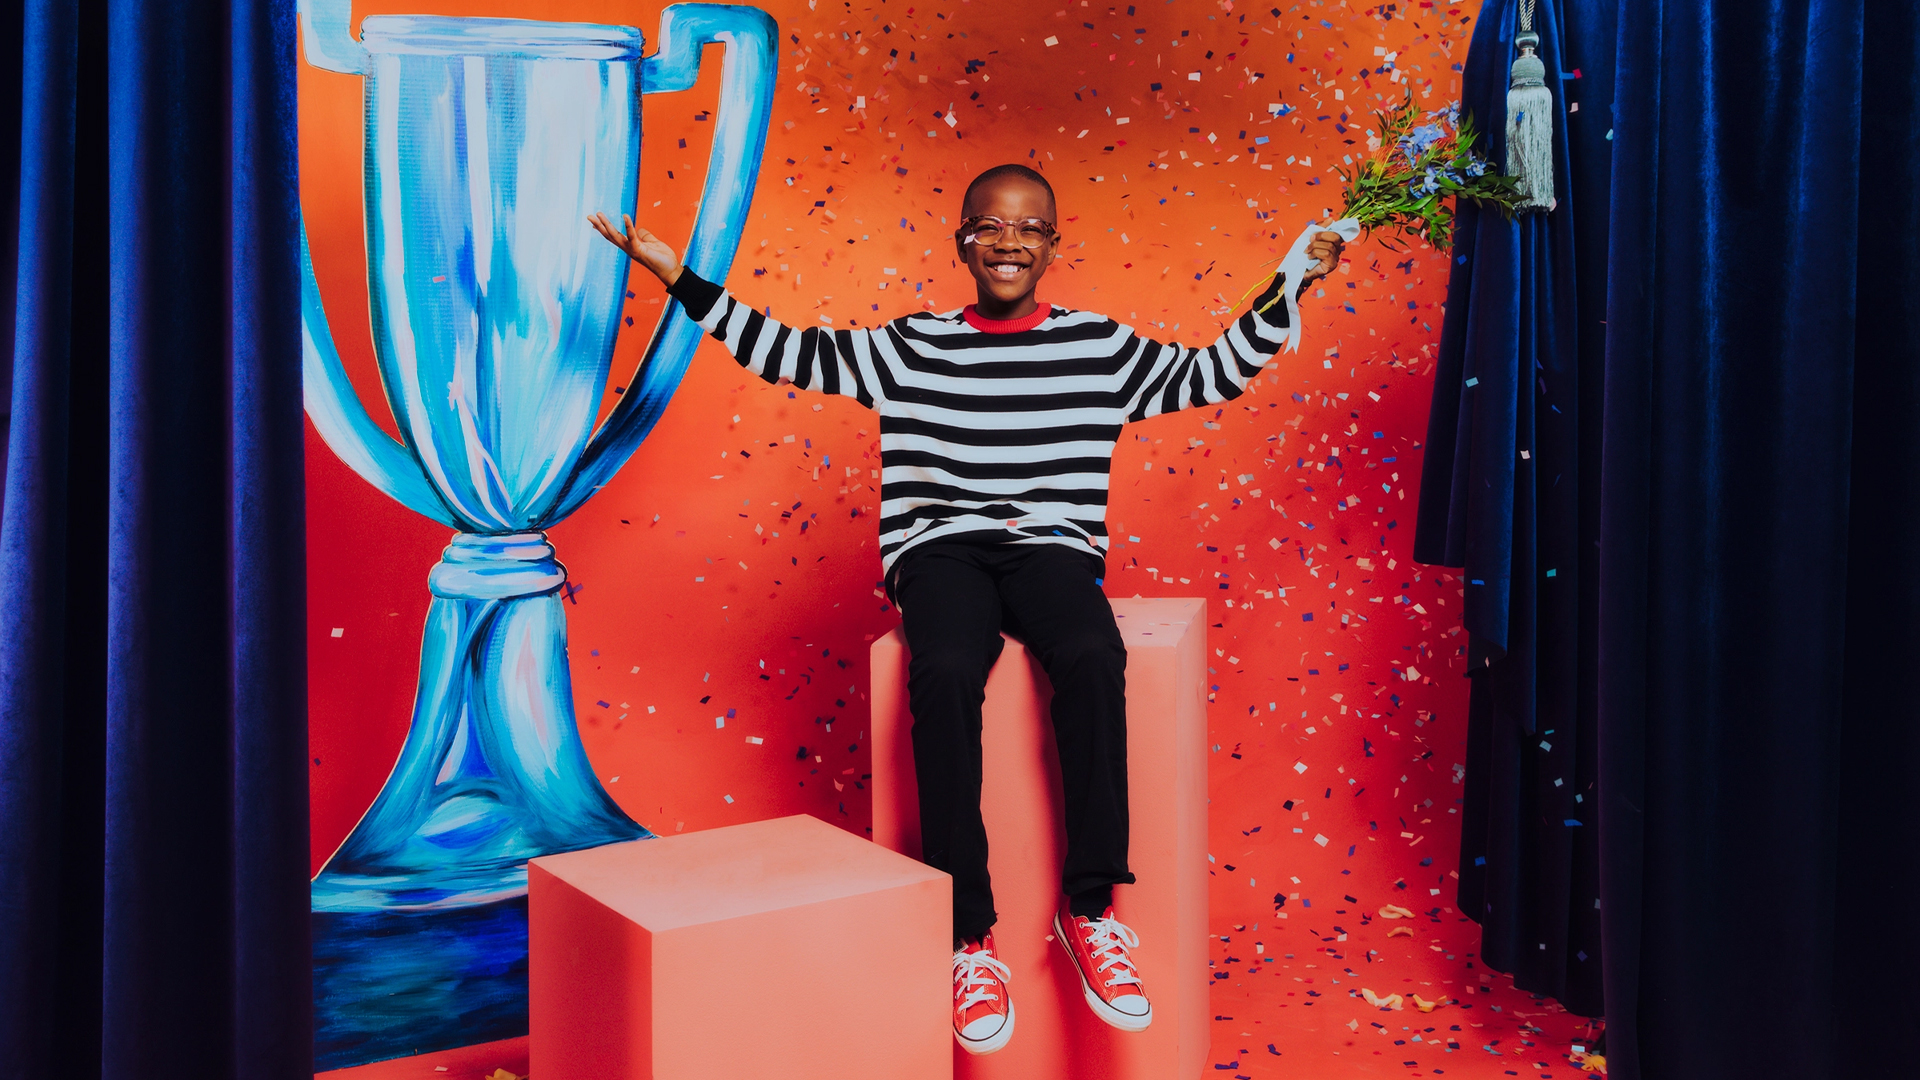 Doing Good Deeds For Others Has Earned 11-Year-Old Orion Jean The Title Of TIME Kid Of The Year